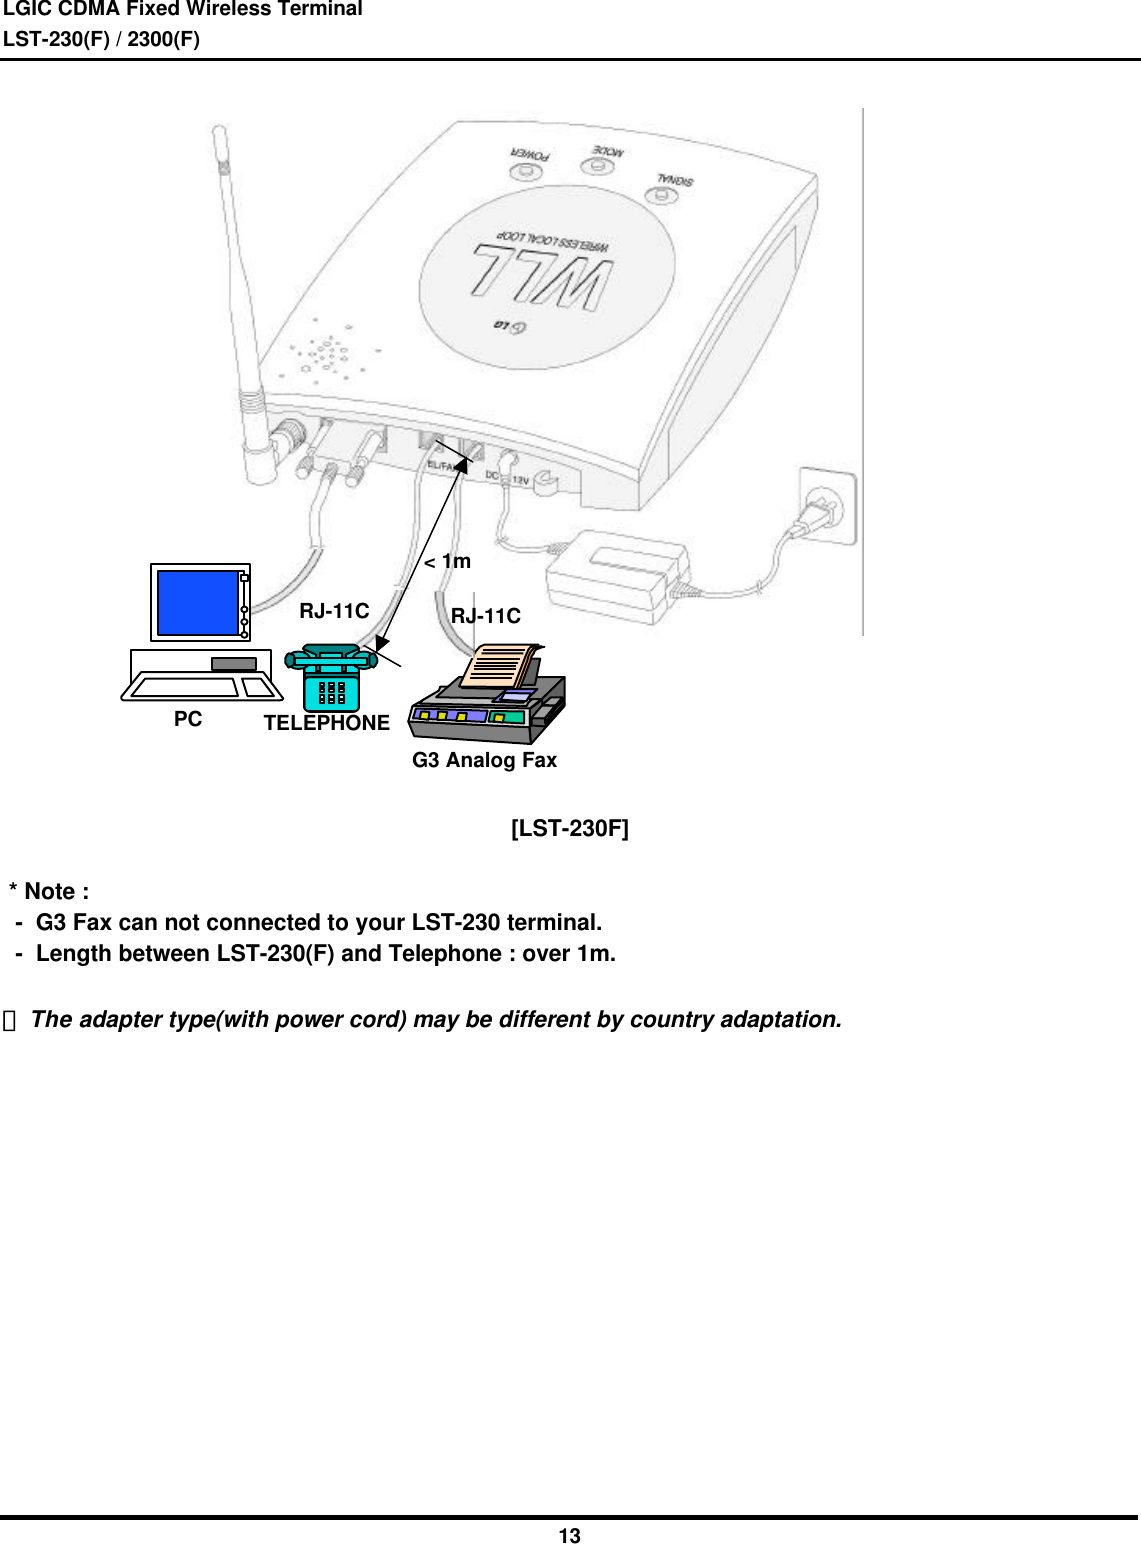 LGIC CDMA Fixed Wireless TerminalLST-230(F) / 2300(F)13[LST-230F] * Note :  -  G3 Fax can not connected to your LST-230 terminal.  -  Length between LST-230(F) and Telephone : over 1m. The adapter type(with power cord) may be different by country adaptation.TELEPHONEG3 Analog FaxPC3&lt; 1mRJ-11C RJ-11C